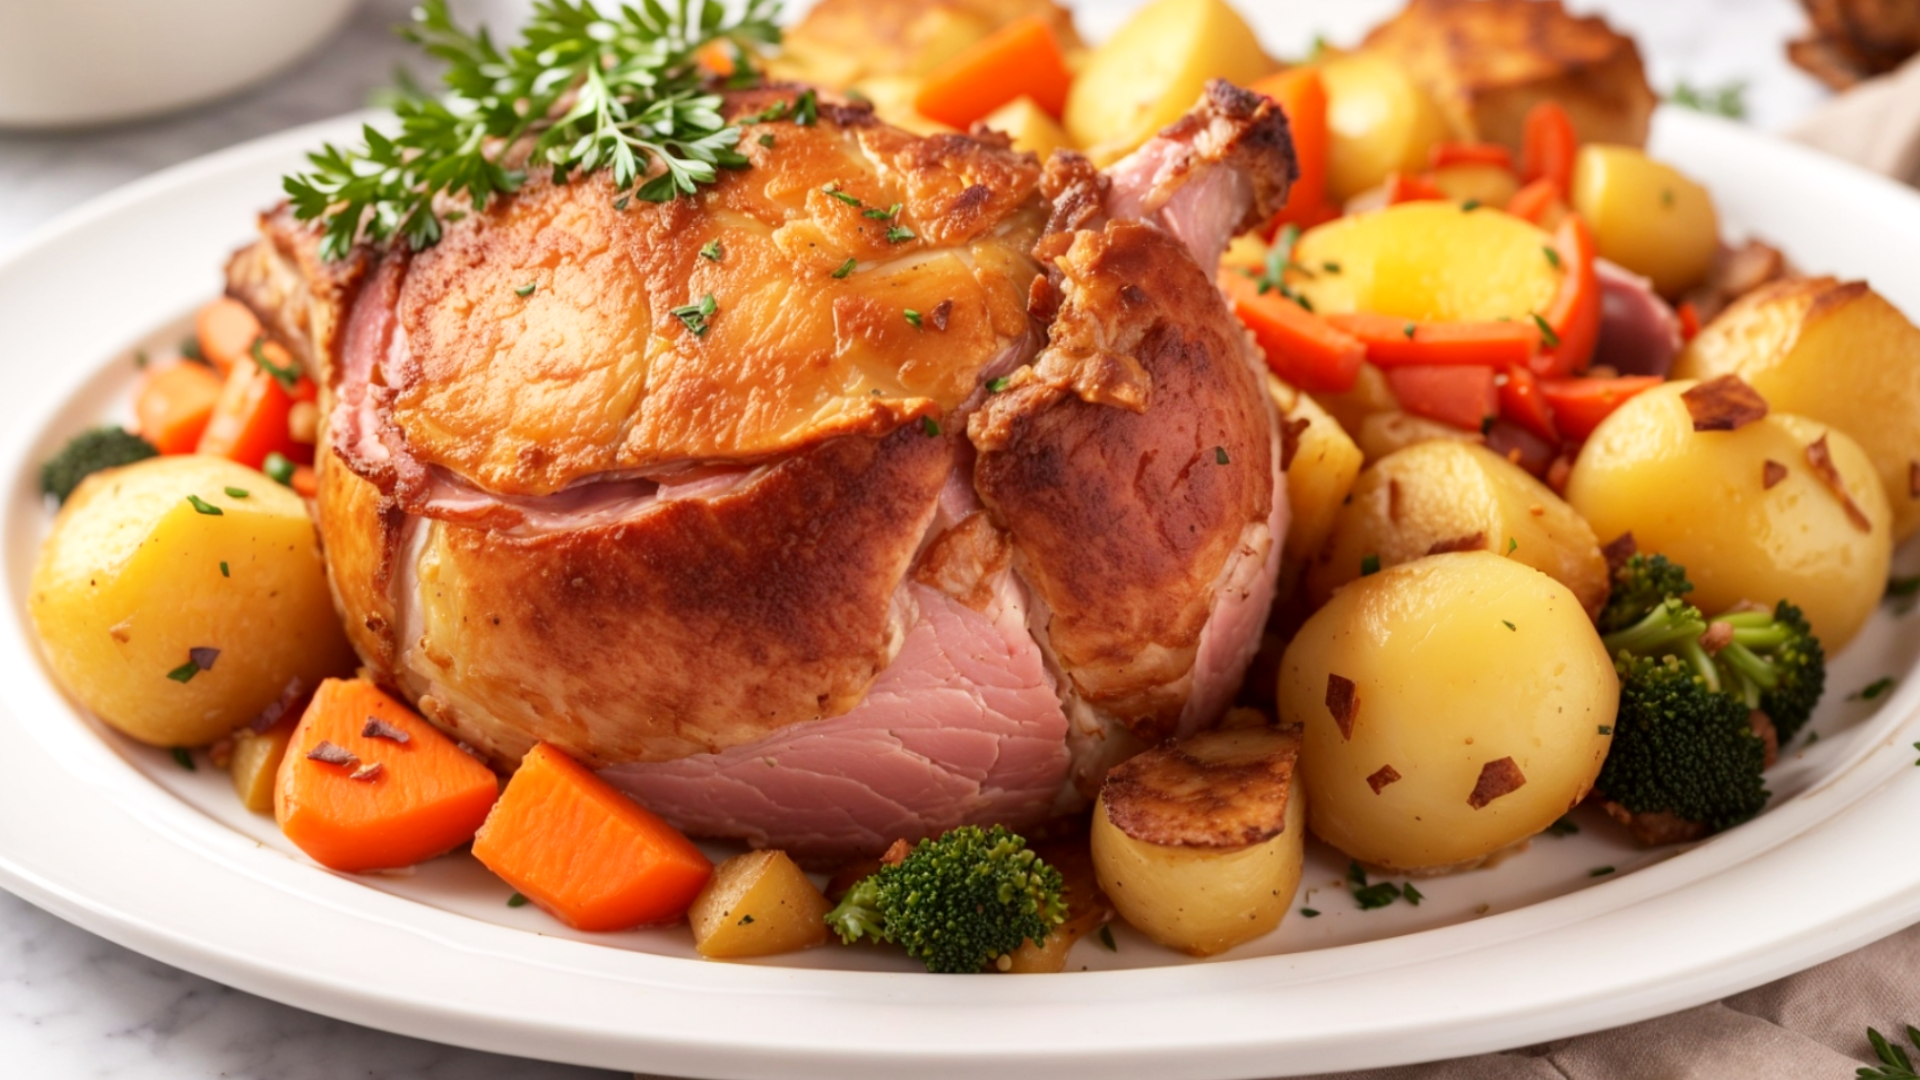 Baked Ham Shank with Potatoes and Vegetables {Cooking Ham Shank the Easy Way}